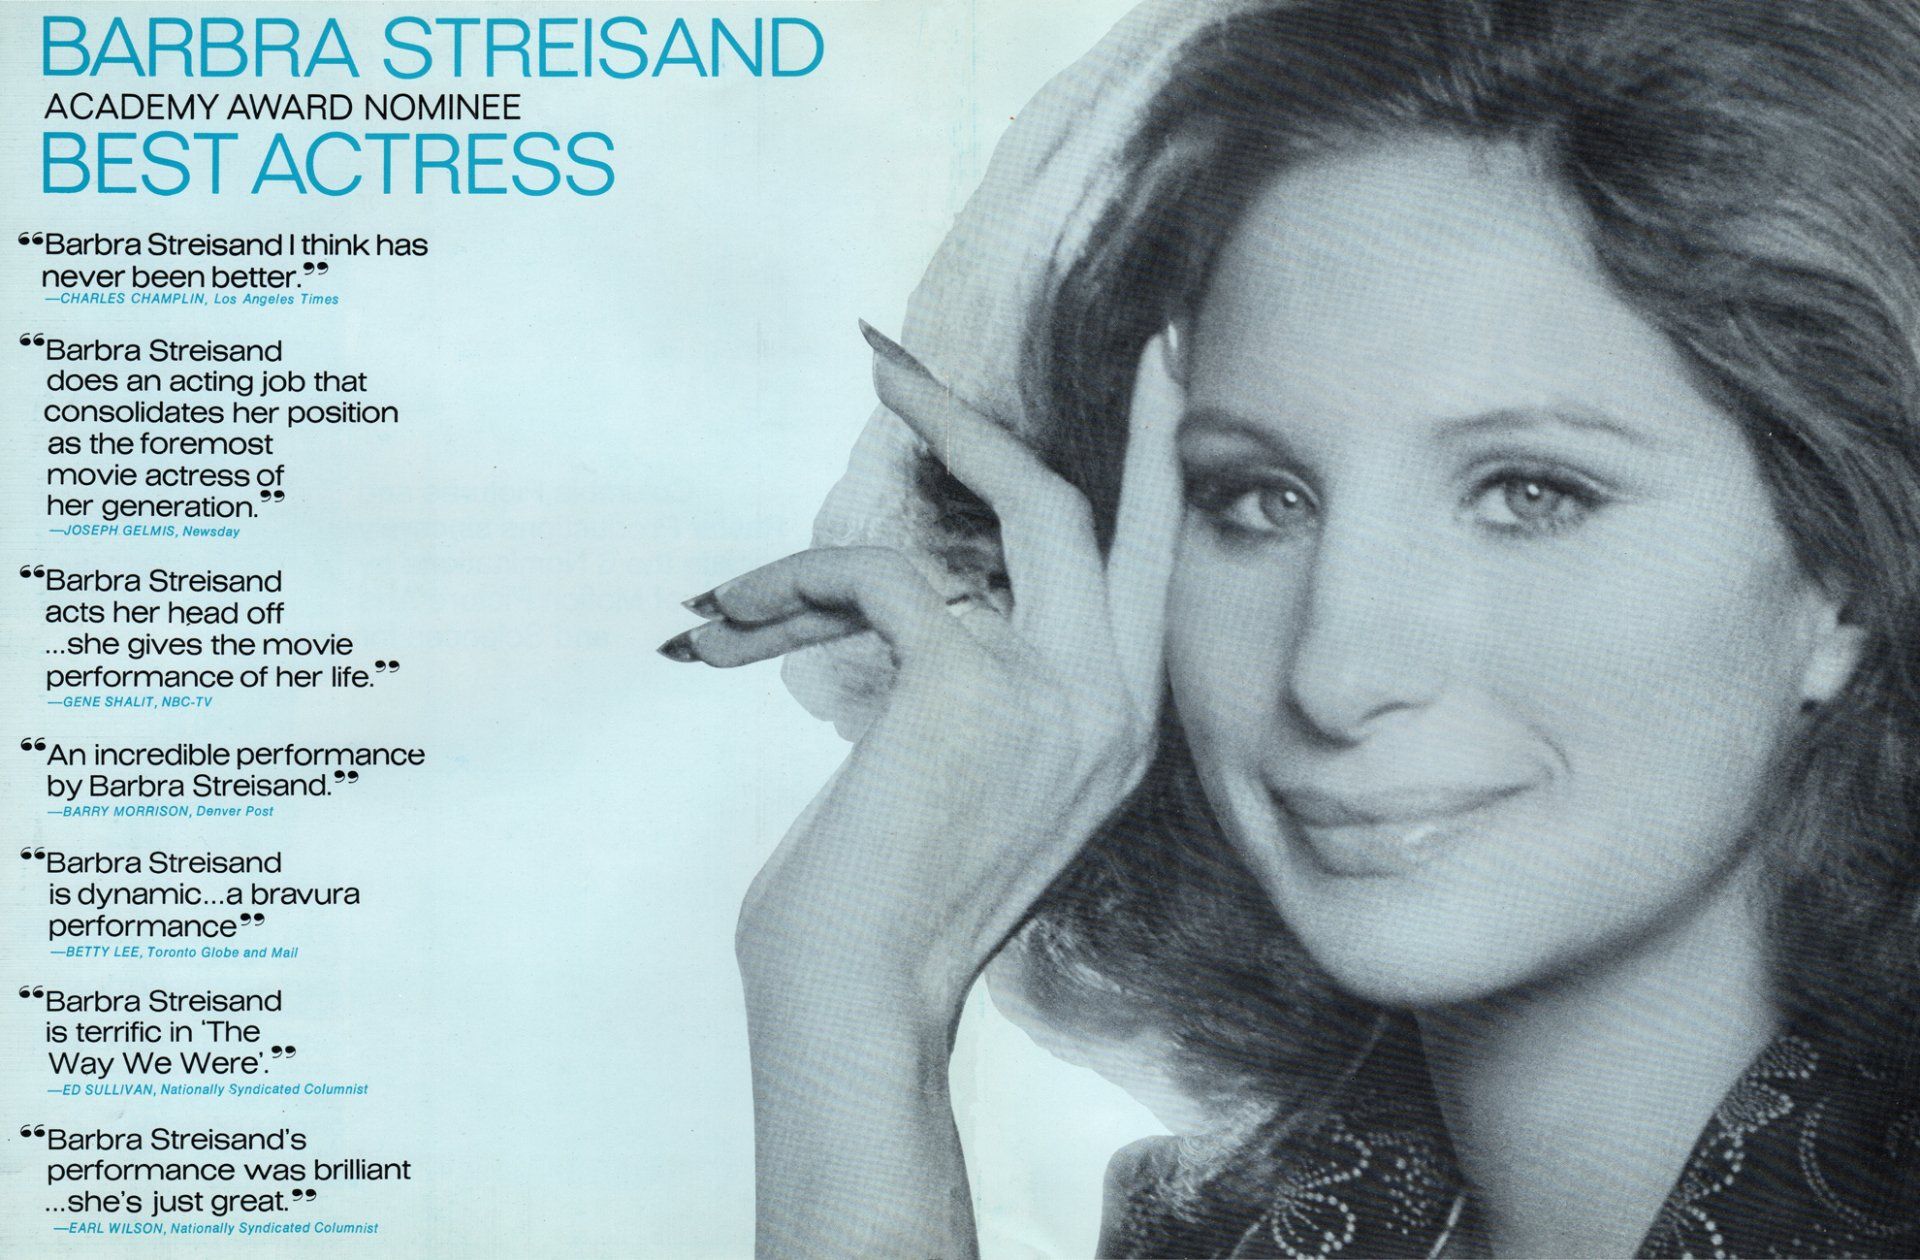 Industry ad for Barbra Streisand for Best Actress Nominee